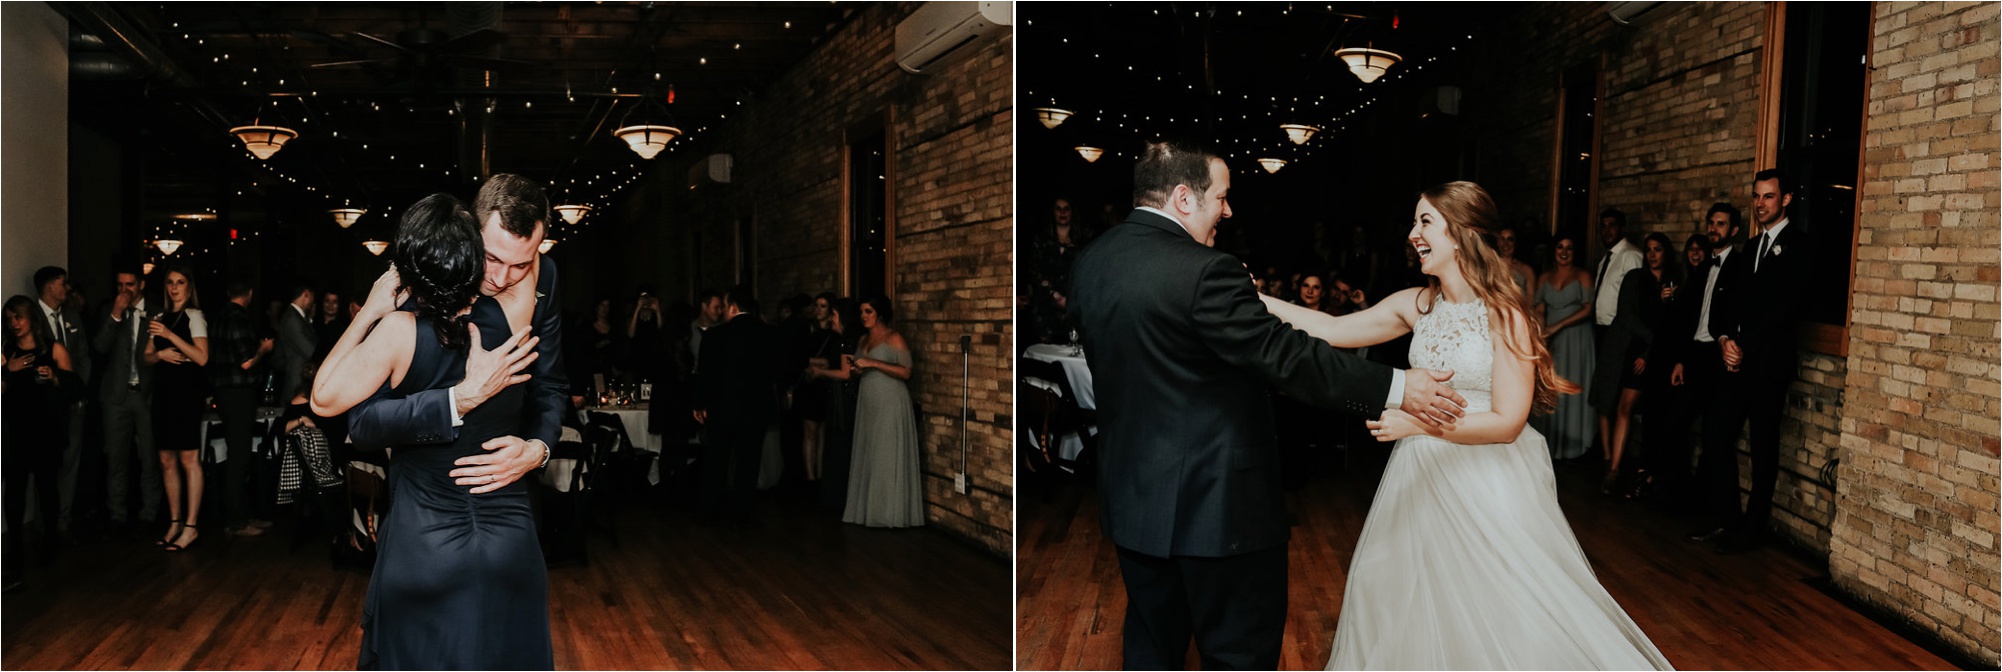 Hewing Hotel and Day Block Event Center Minneapolis Wedding Photographer_3002.jpg